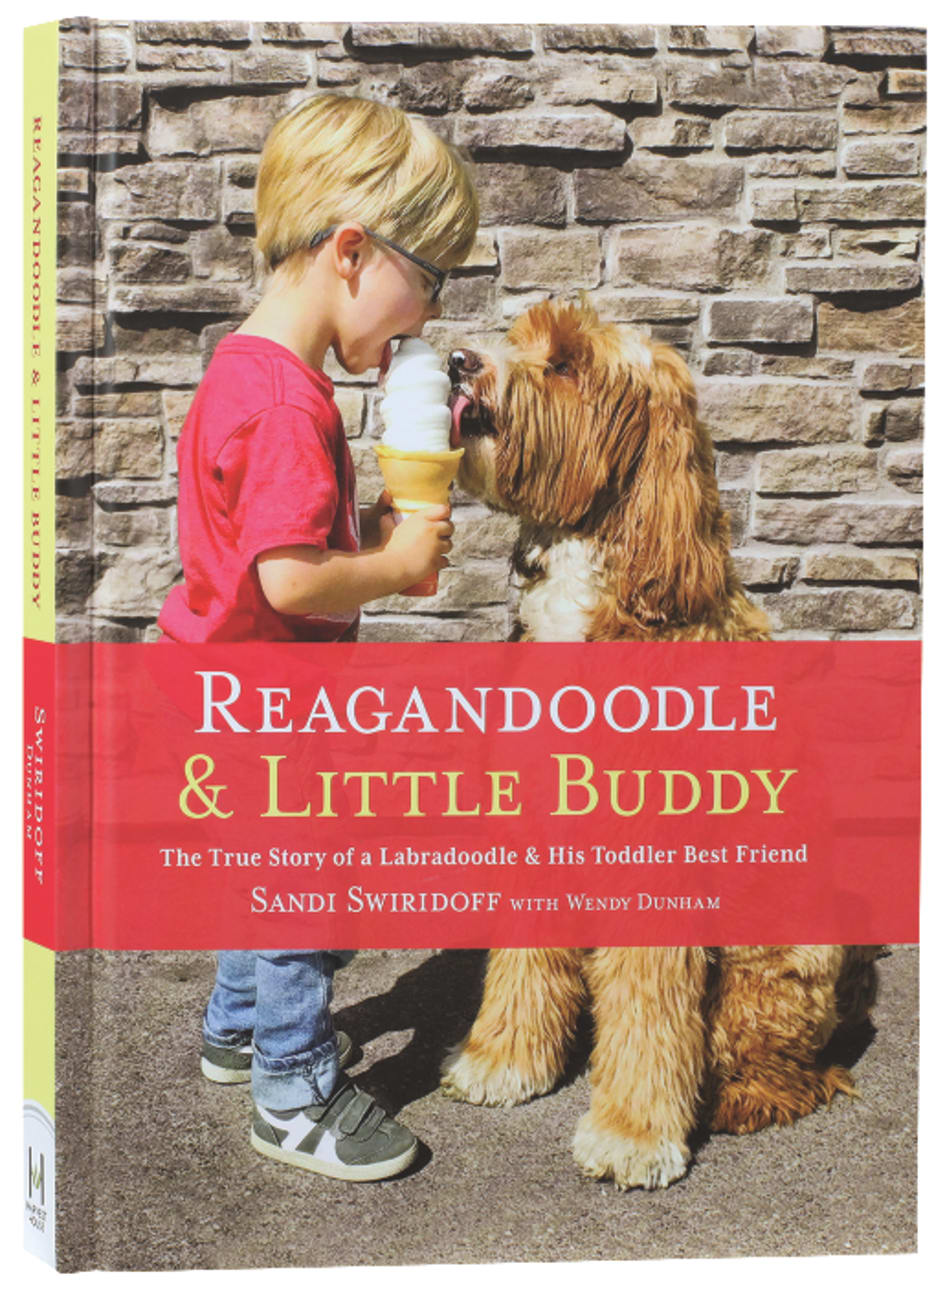 Reagandoodle and Little Buddy: The True Story of a Labradoodle and His Toddler Best Friend (Adventures Of Reagandoodle And Little Buddy Series) Hardback